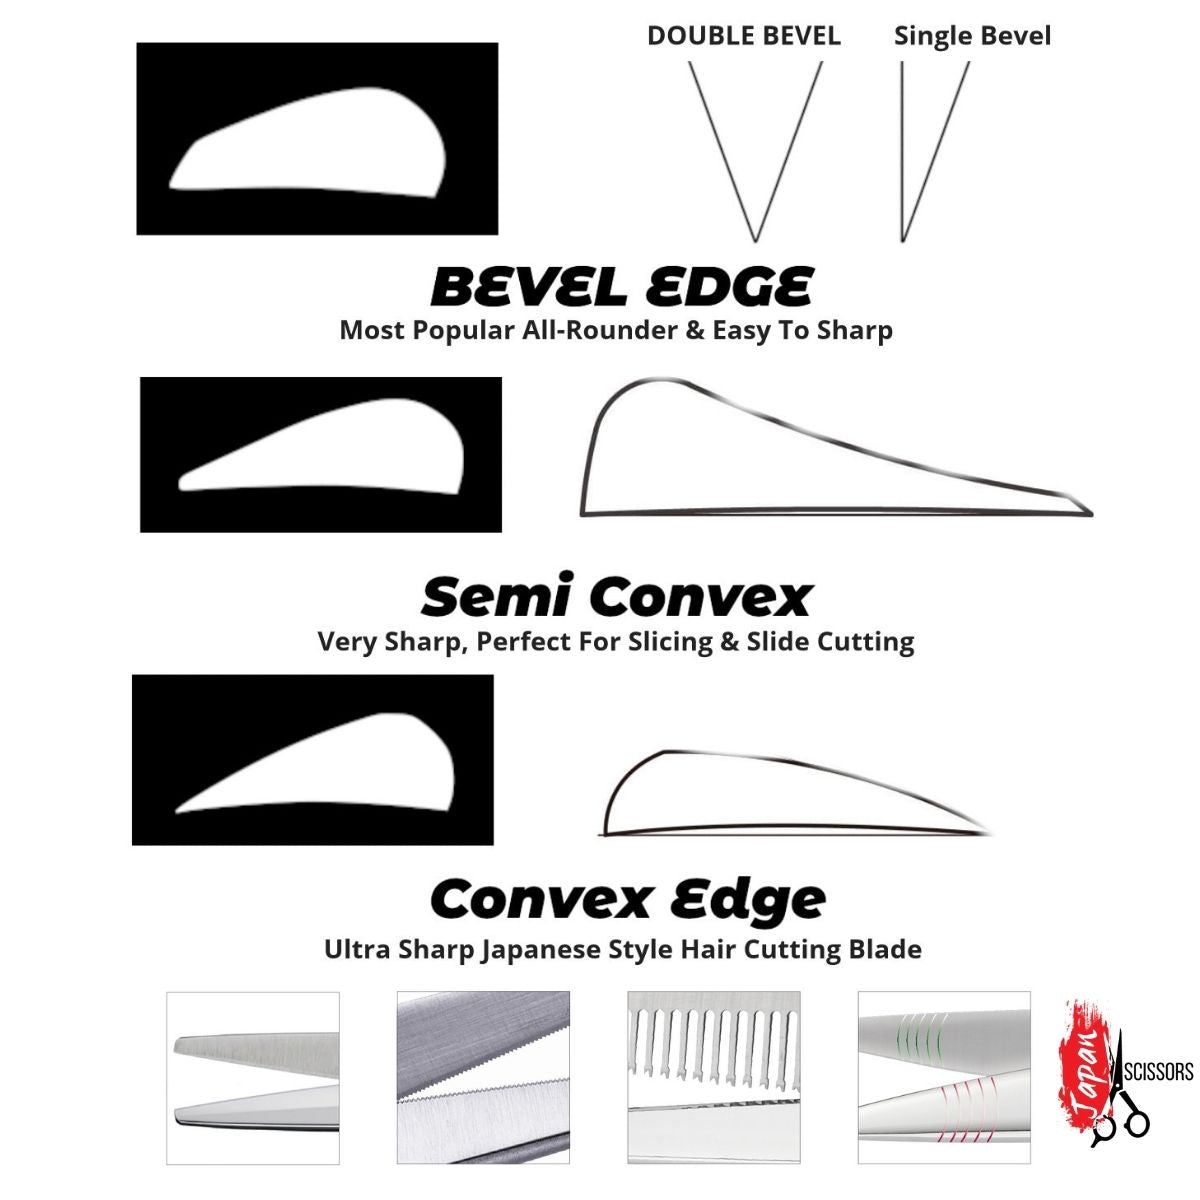 The different types of hair cutting shear blades, including convex, bevel and more!